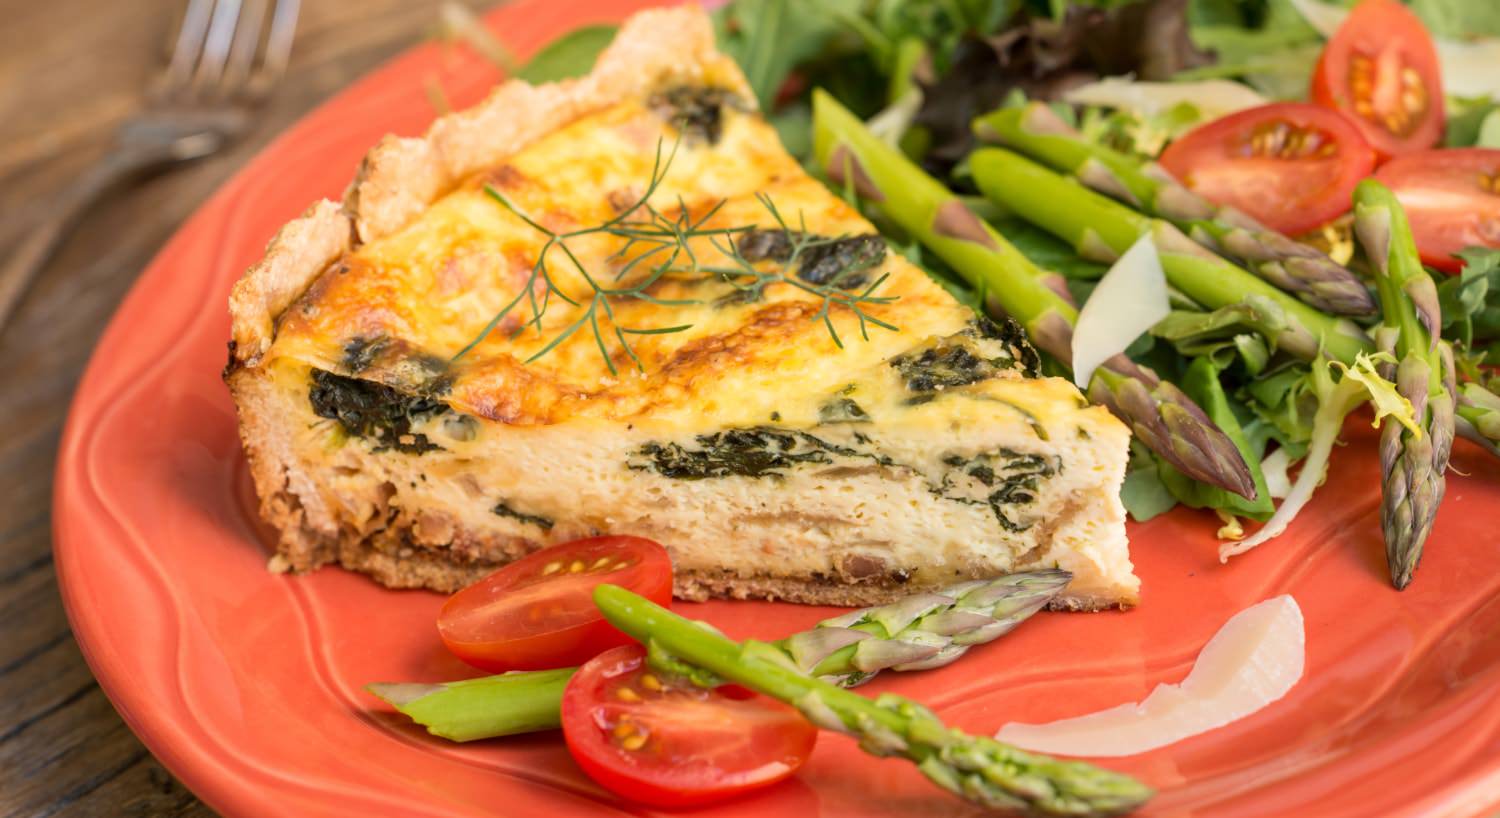 Orange plate with quiche, sliced tomatoes, lettuce, and asparagus